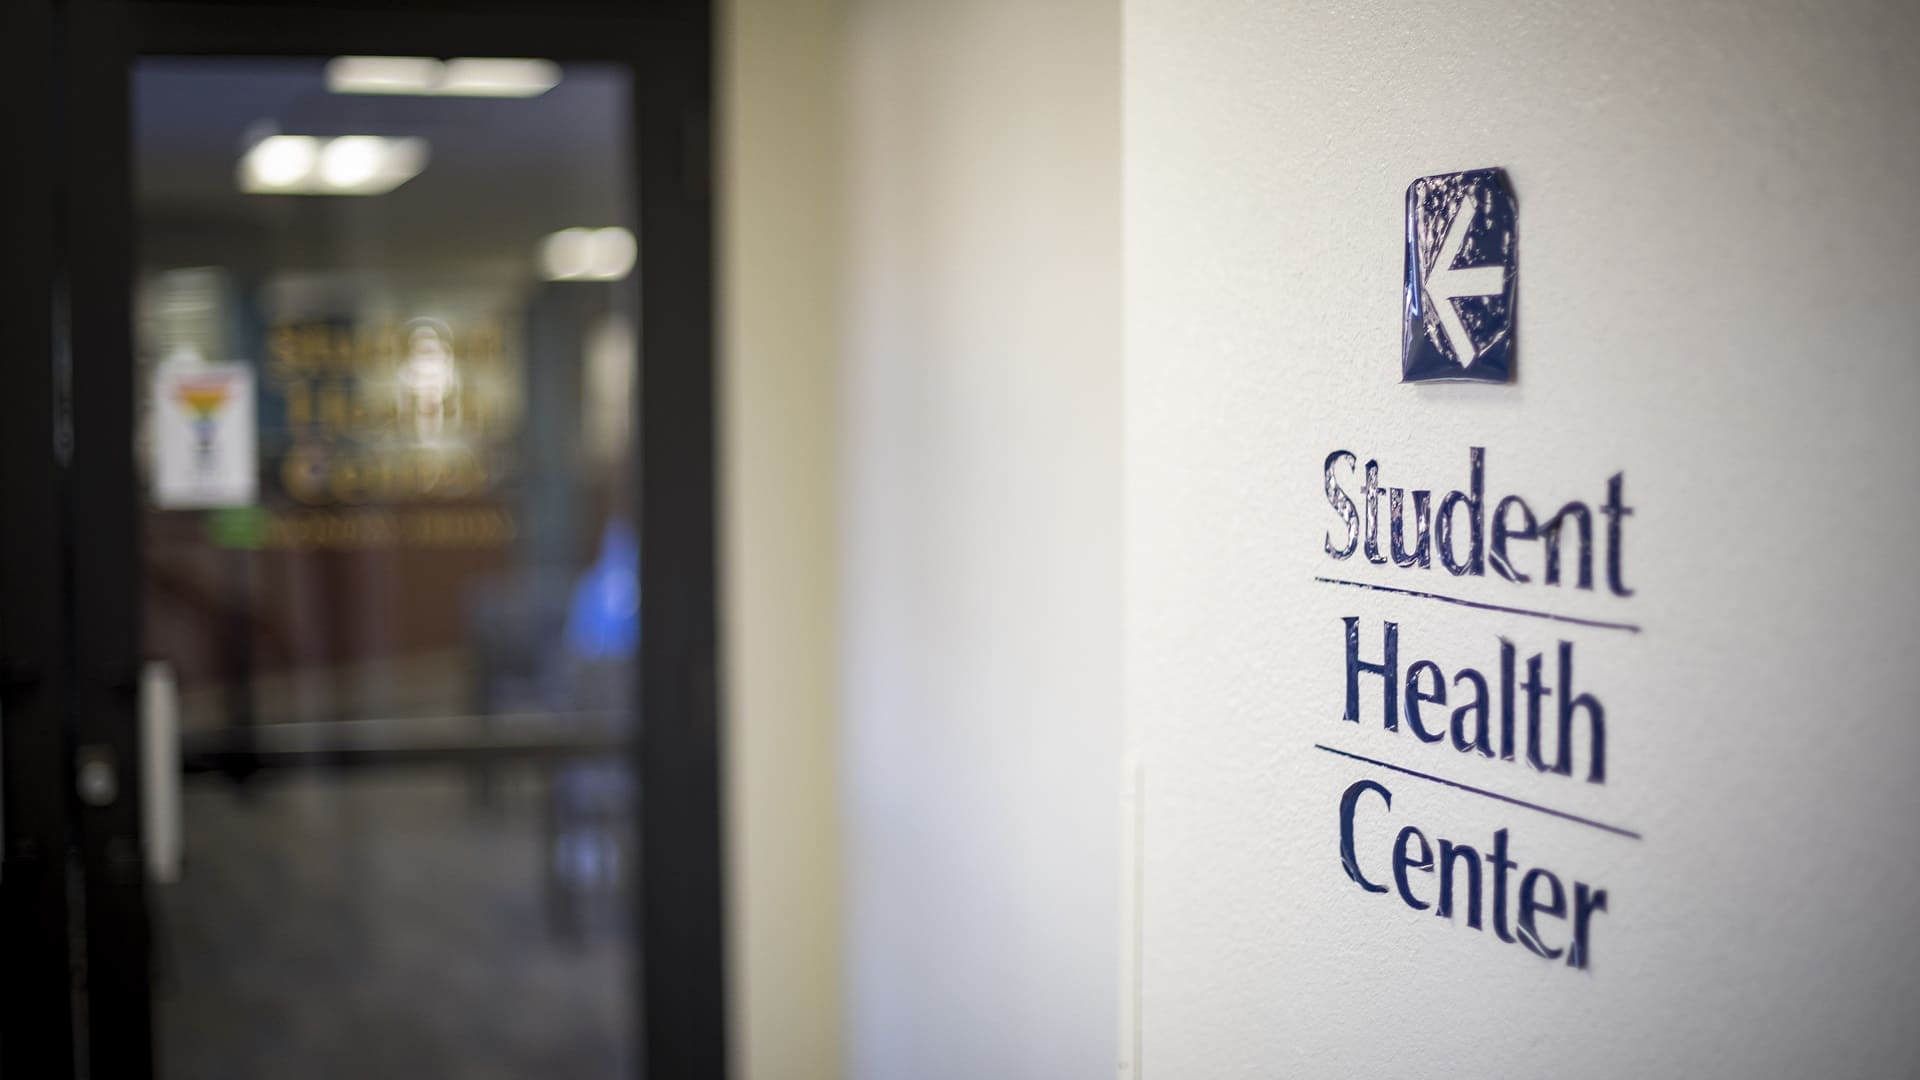 The words "Student Health Center" are on the right wall of a hallway with the entrance door on the left